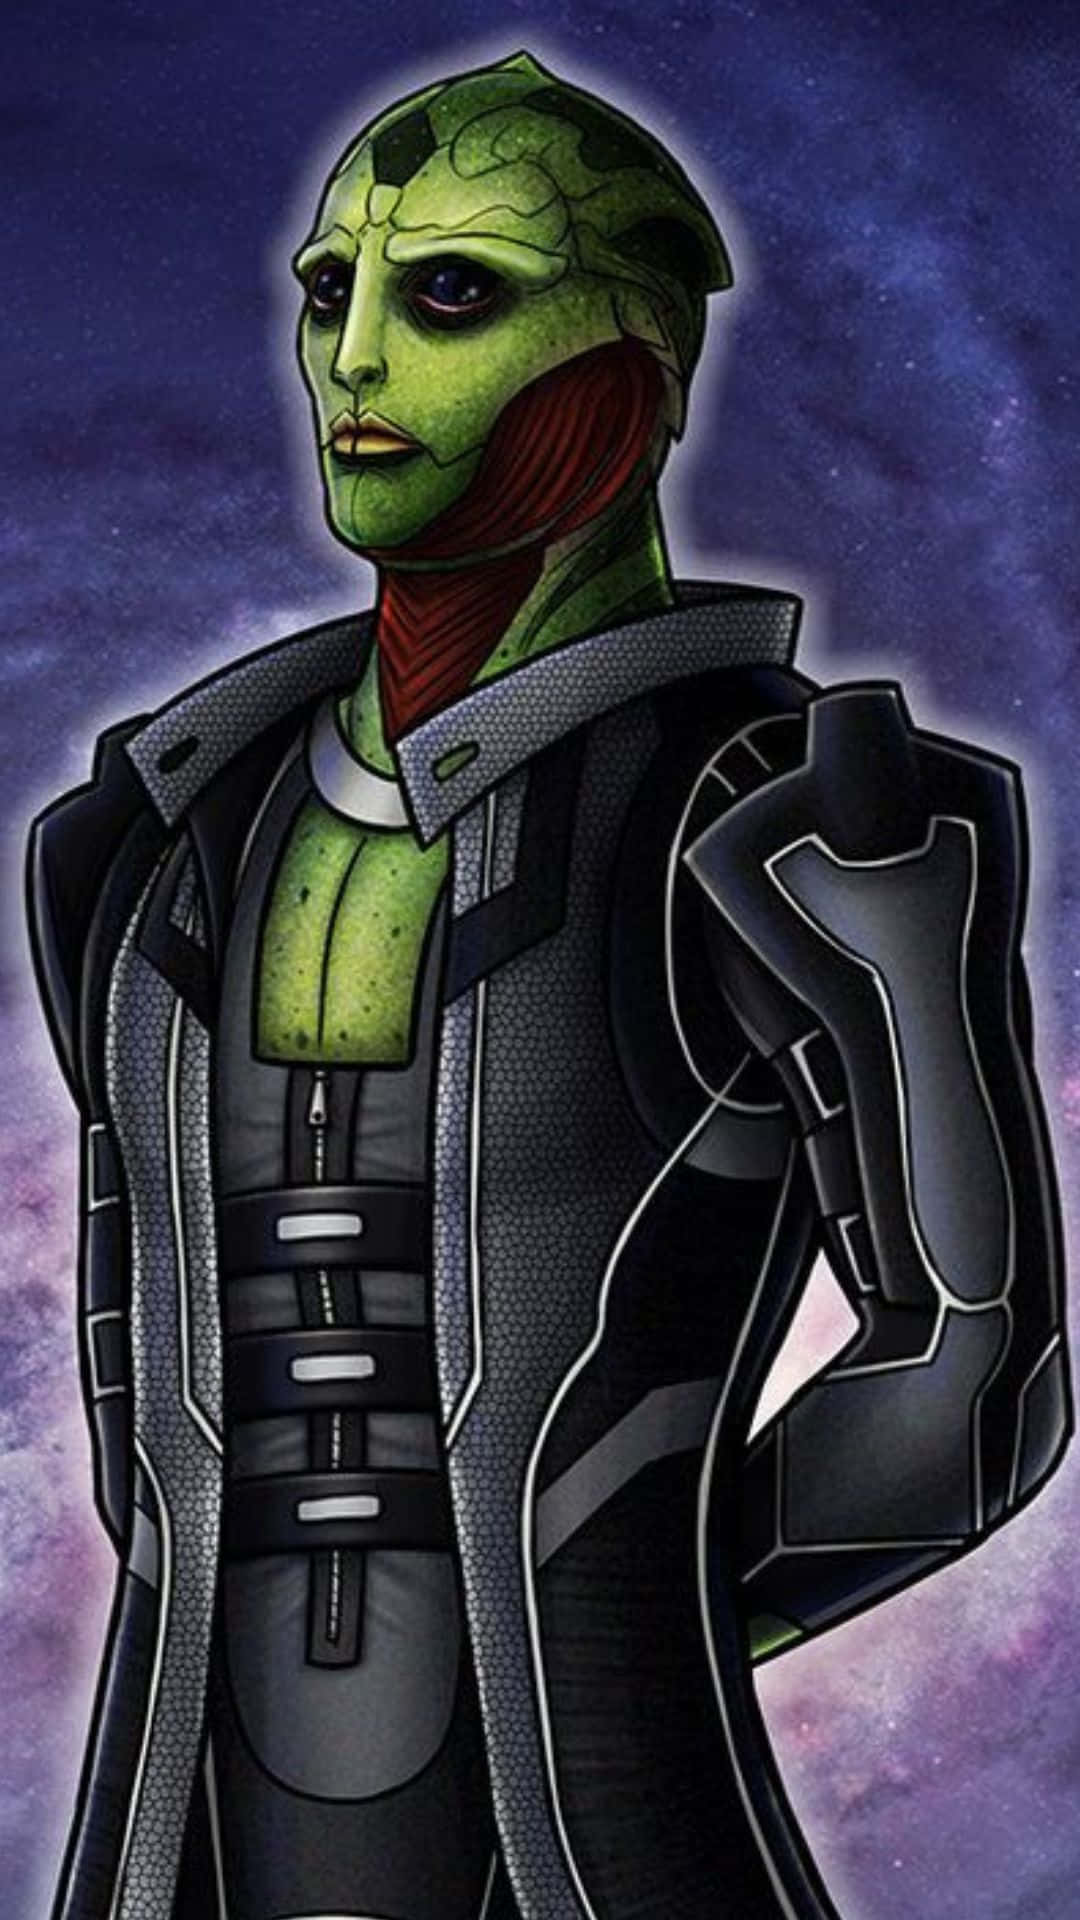 Thane Krios, the Drell Assassin in Action Wallpaper